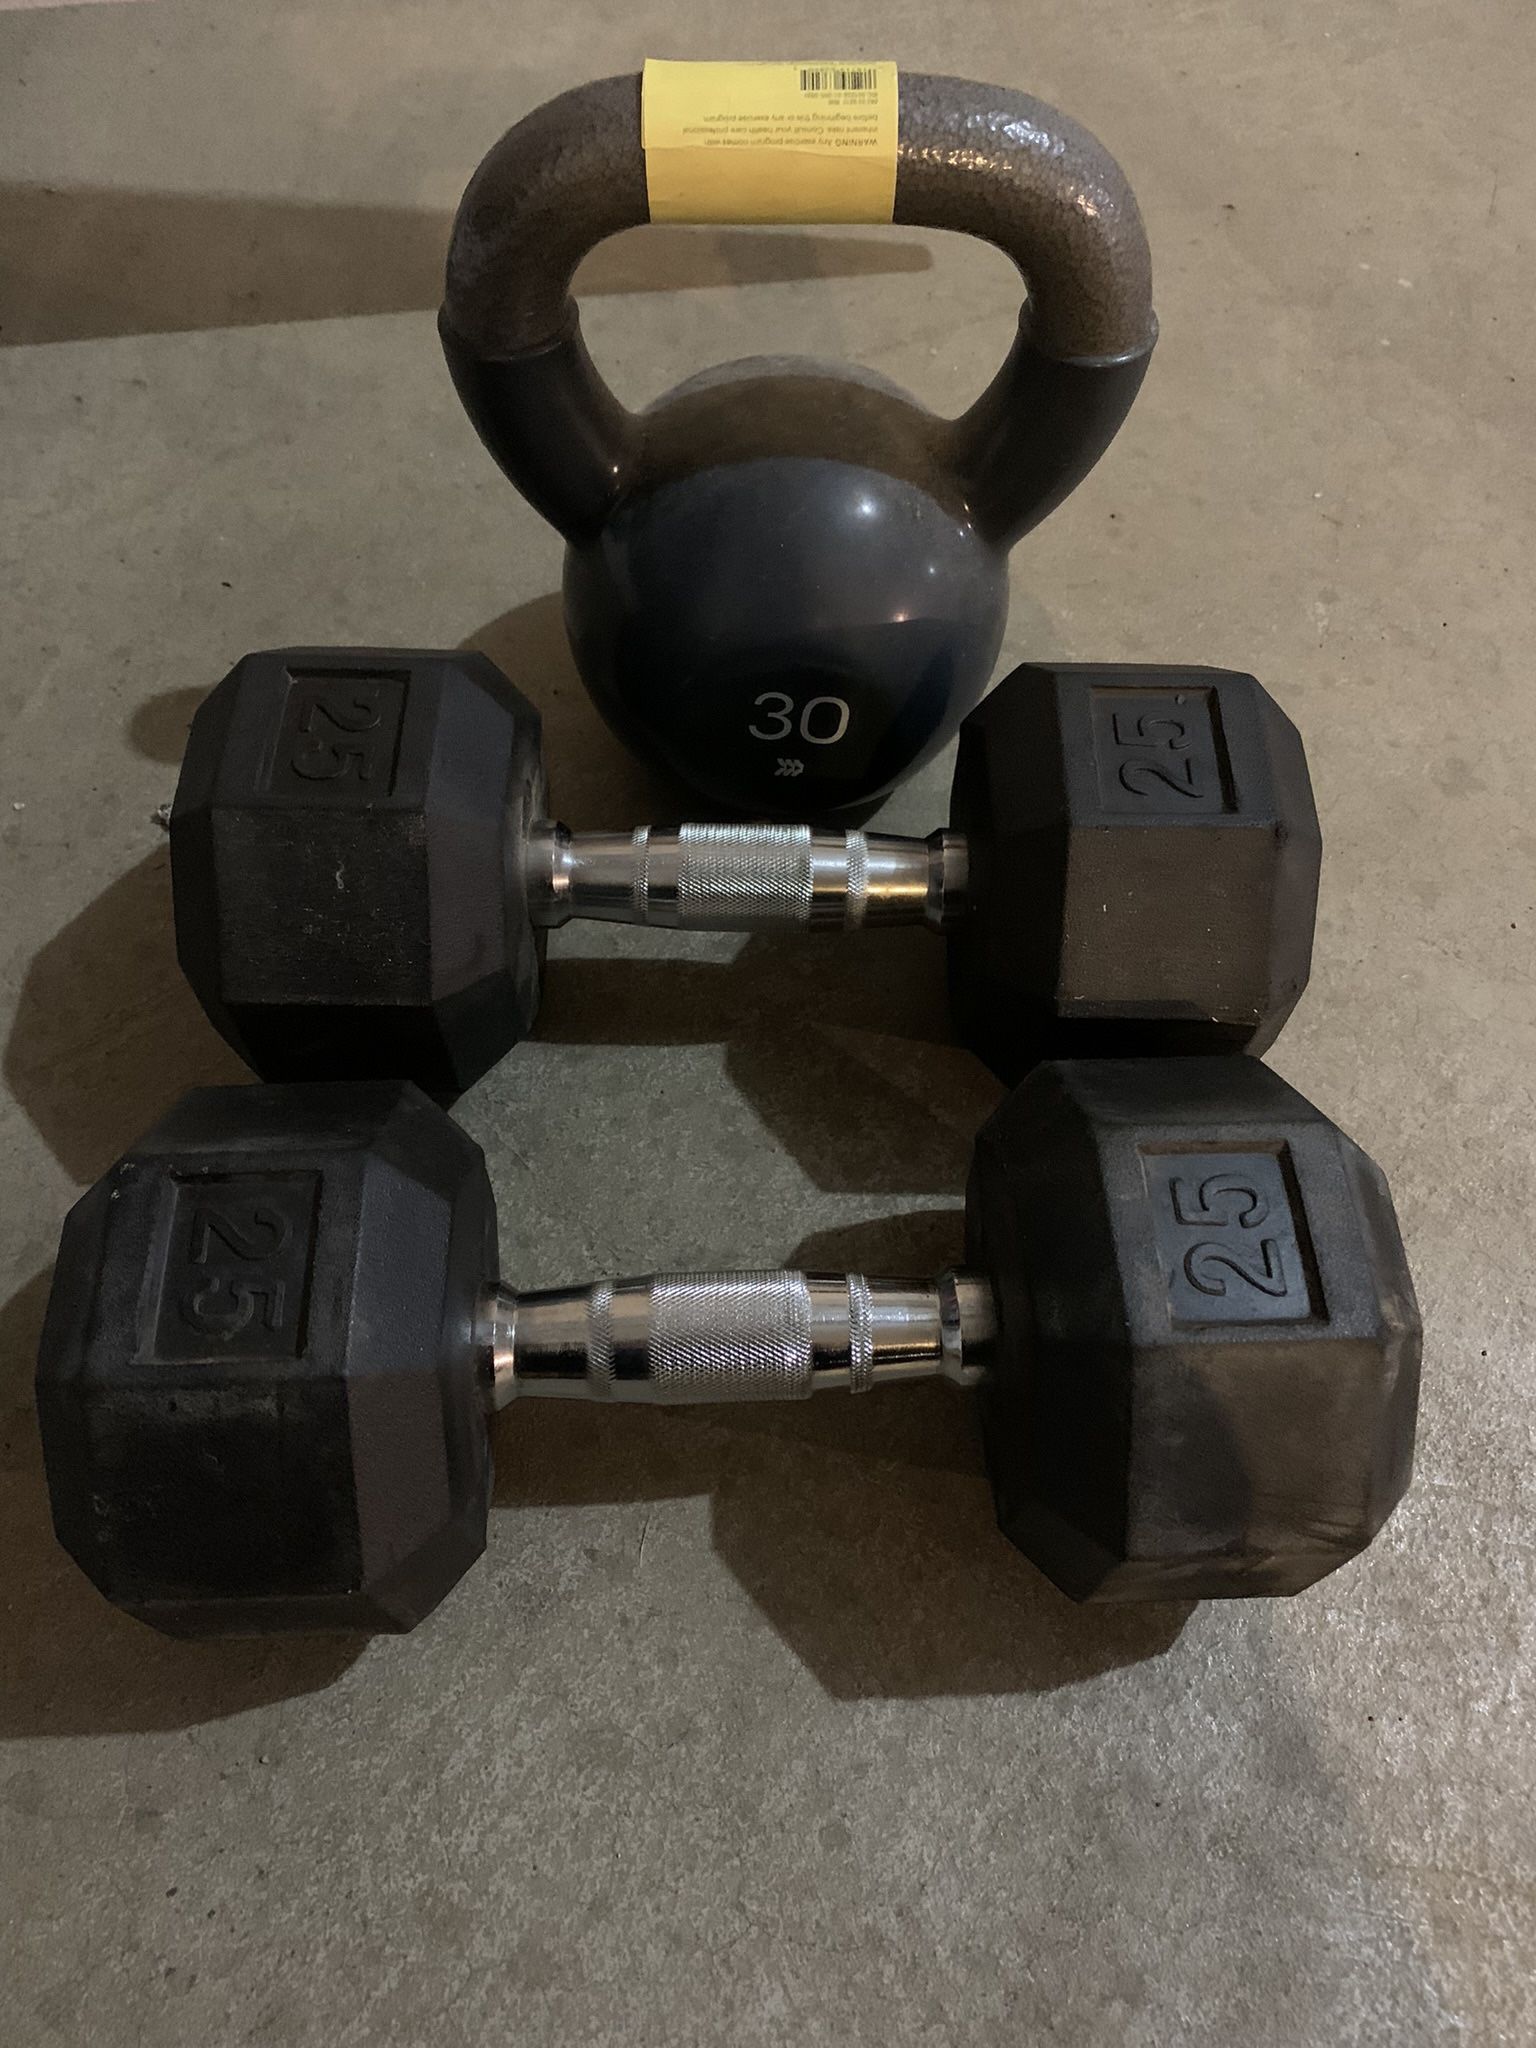 Dumbbells X 2 &  All In Motion Kettle Bell🏋️🎗️🏋️‍♀️